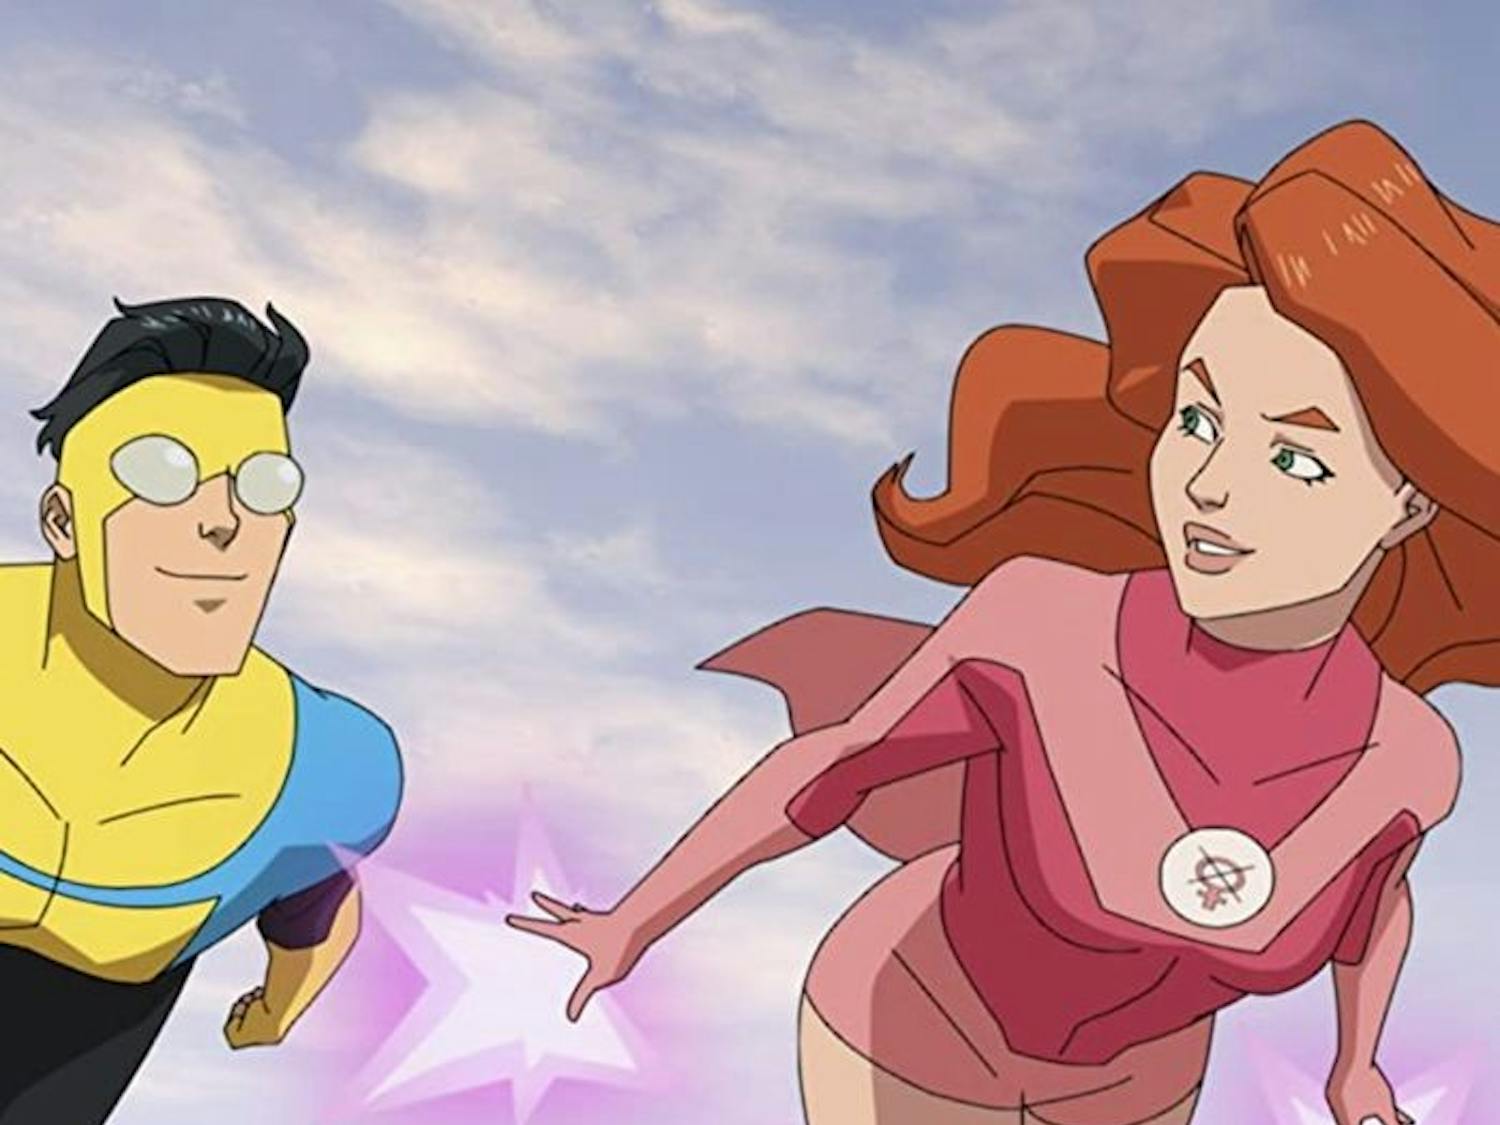 “Invincible” parodies and satirizes the usual plot points and story beats of a stereotypical blockbuster superhero story, like those that involve saving the world from an alien invasion.